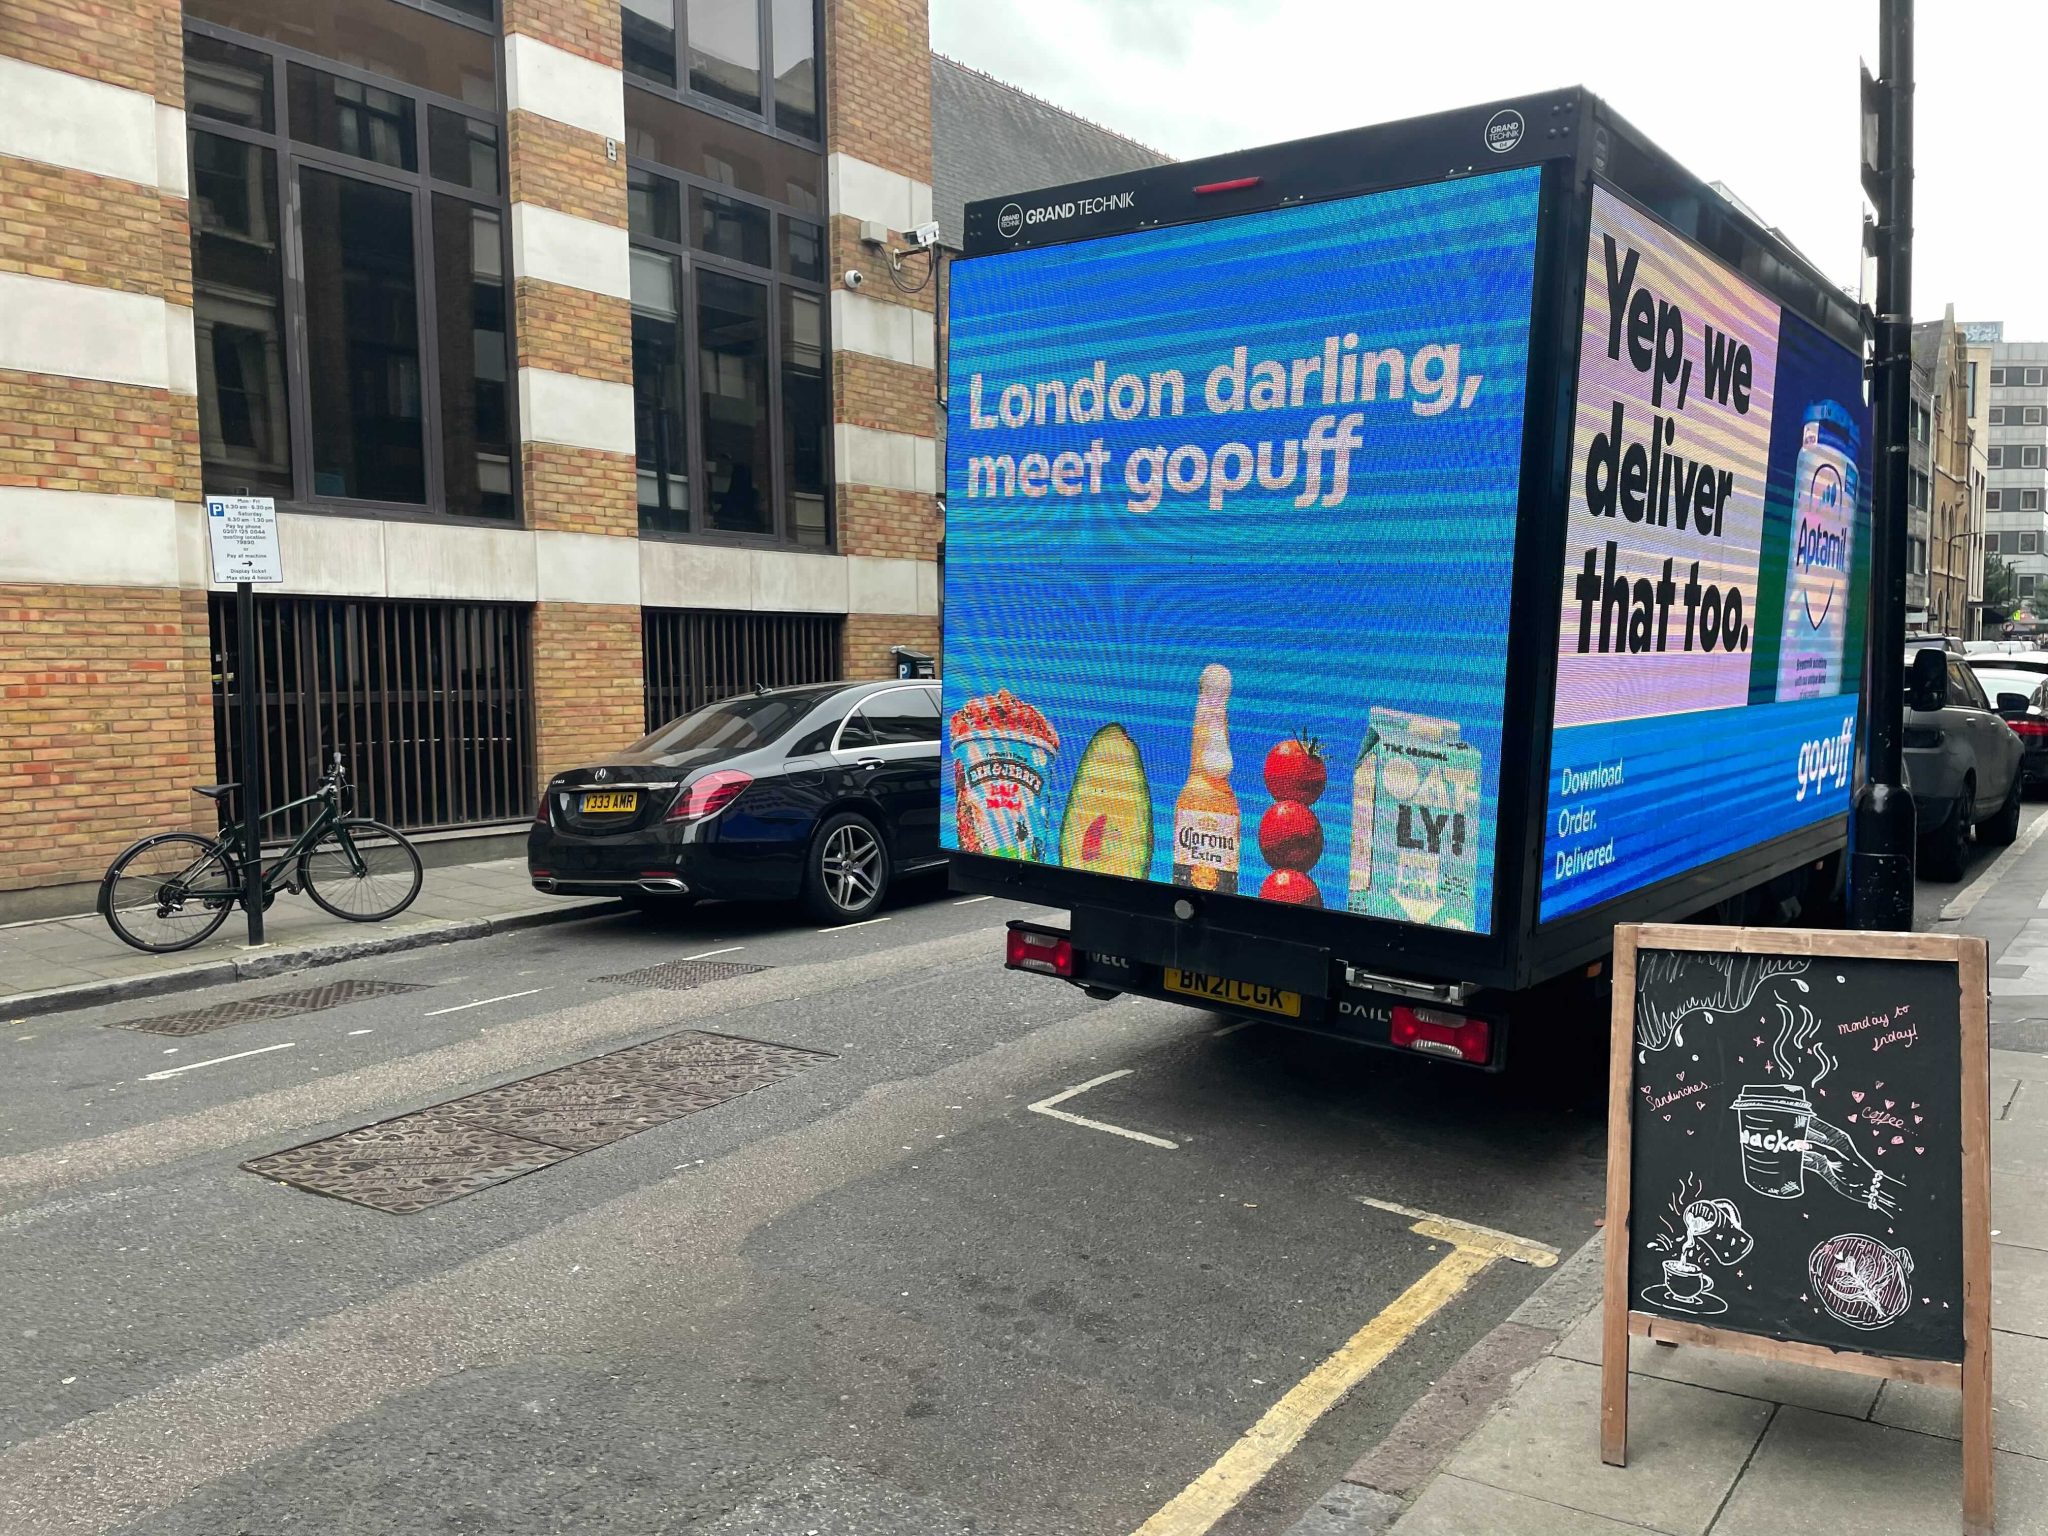 SoftBankbacked Gopuff facing staff exits after UK acquisition Sifted